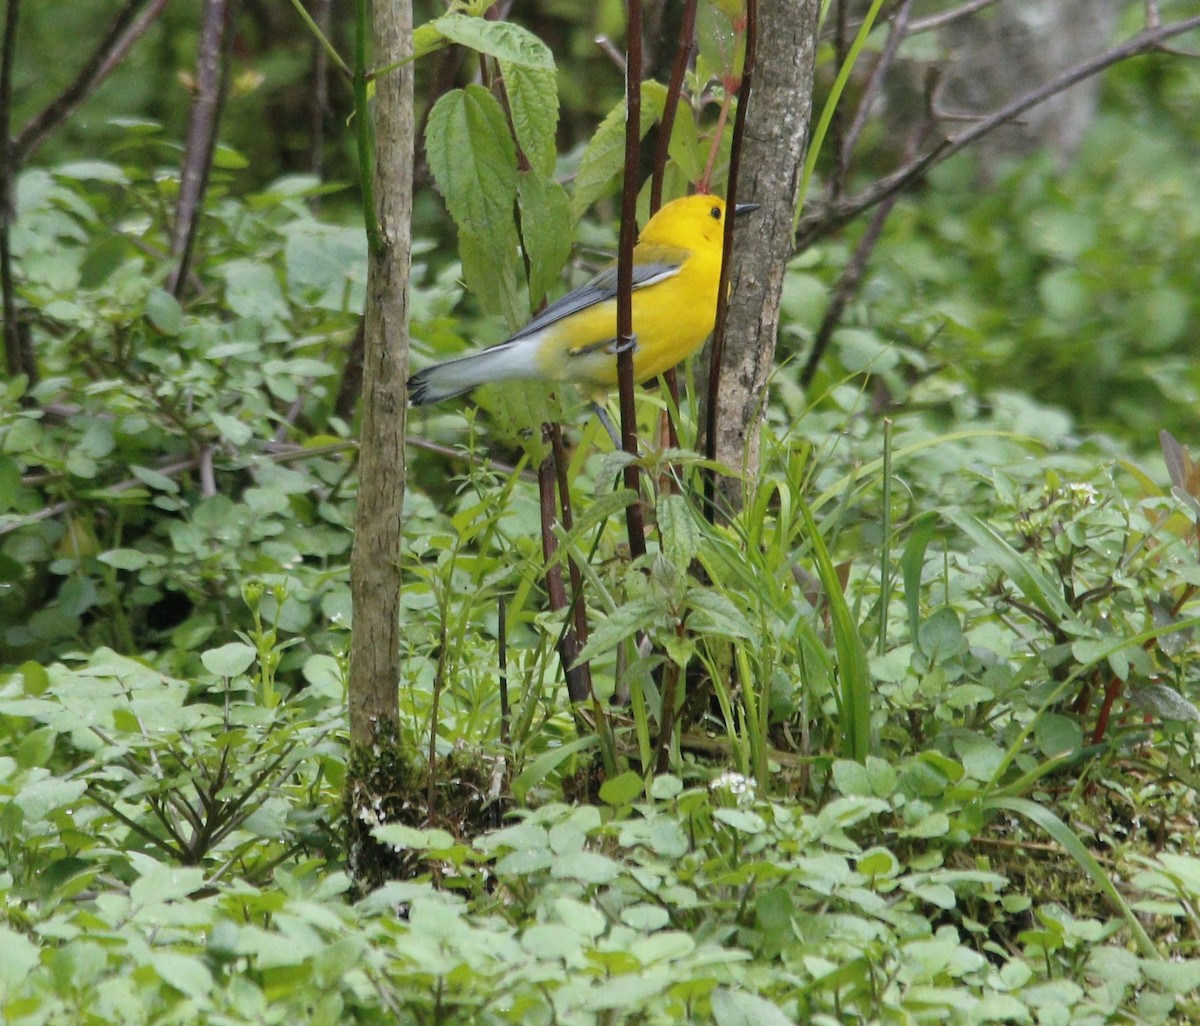 Prothonotary Warbler - Becky Lutz